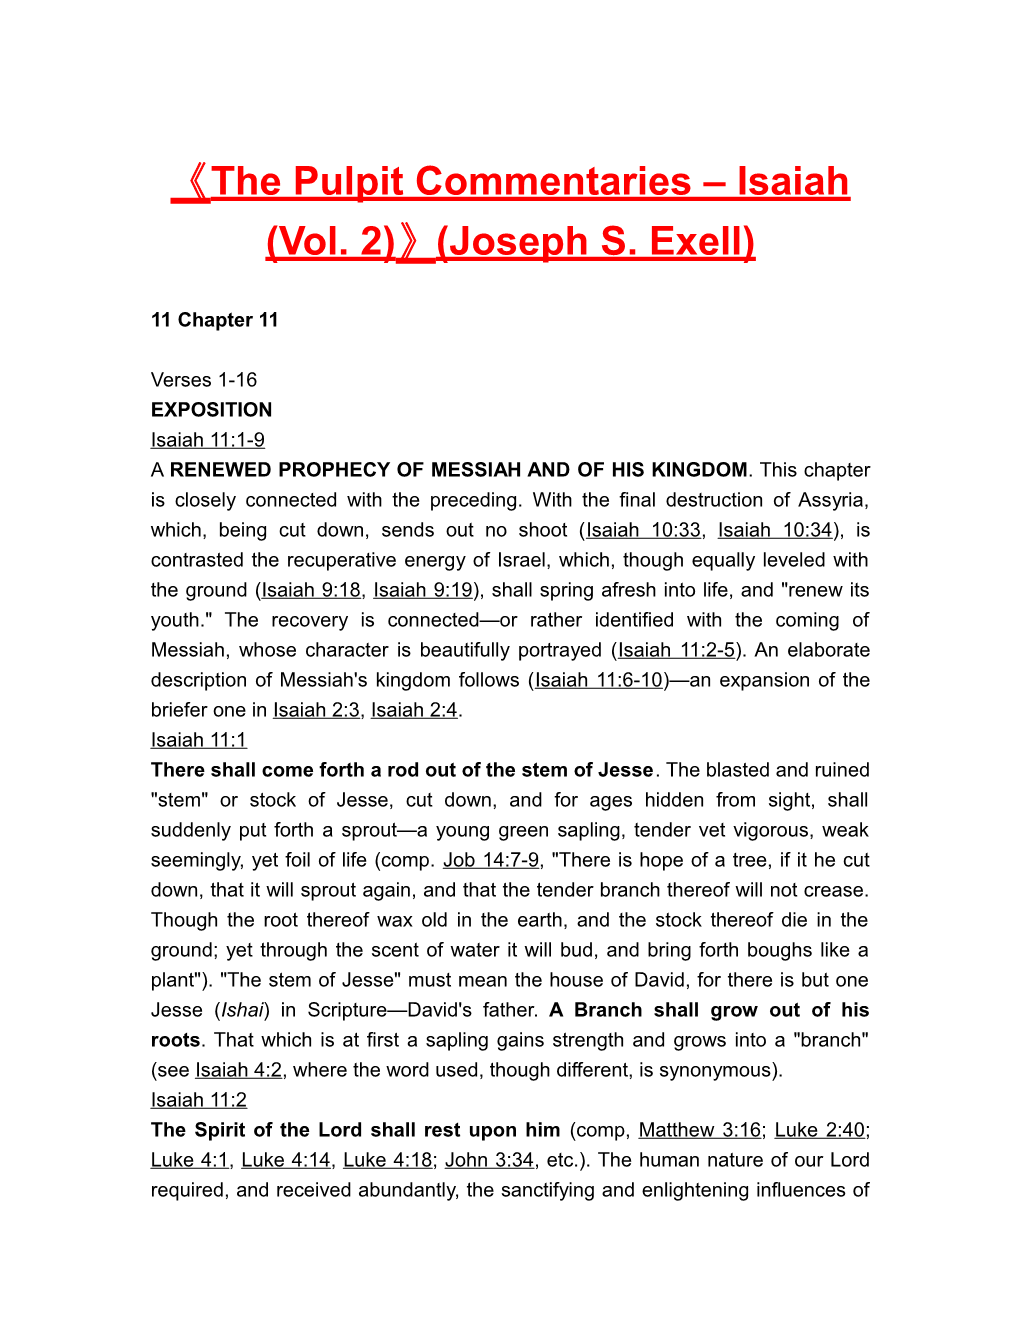 The Pulpit Commentaries Isaiah (Vol. 2) (Joseph S. Exell)